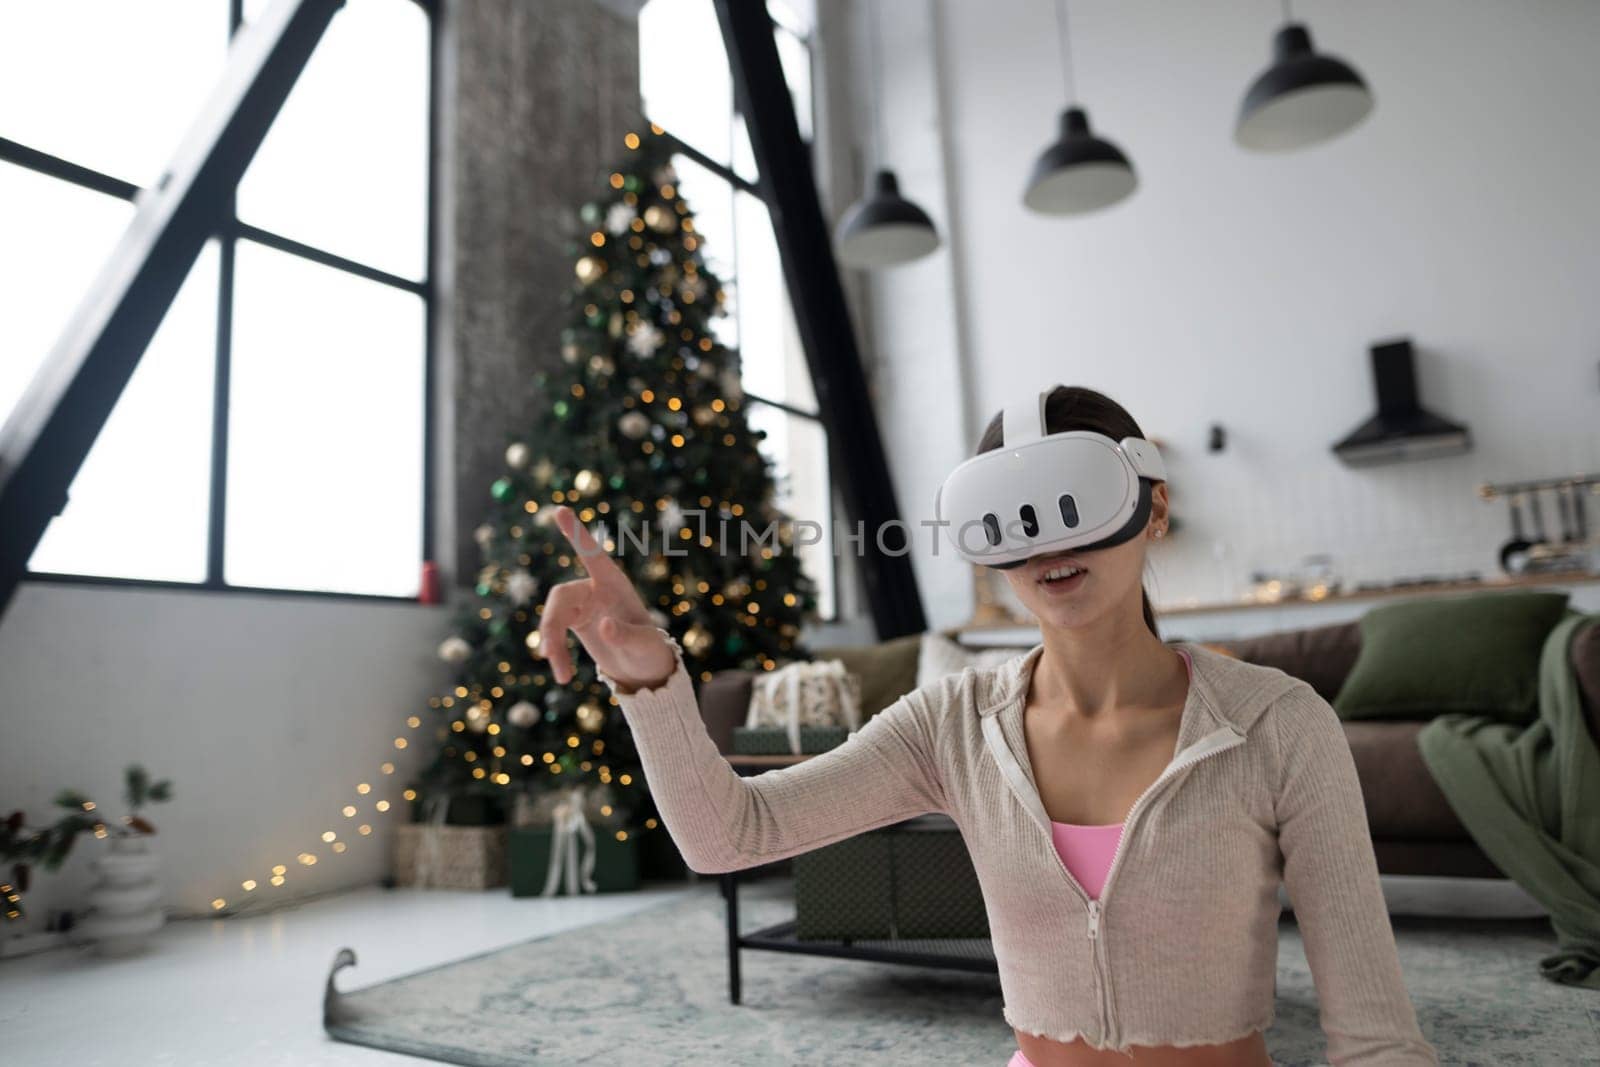 During the festive season, a trendy young woman is seen in a virtual reality headset. High quality photo